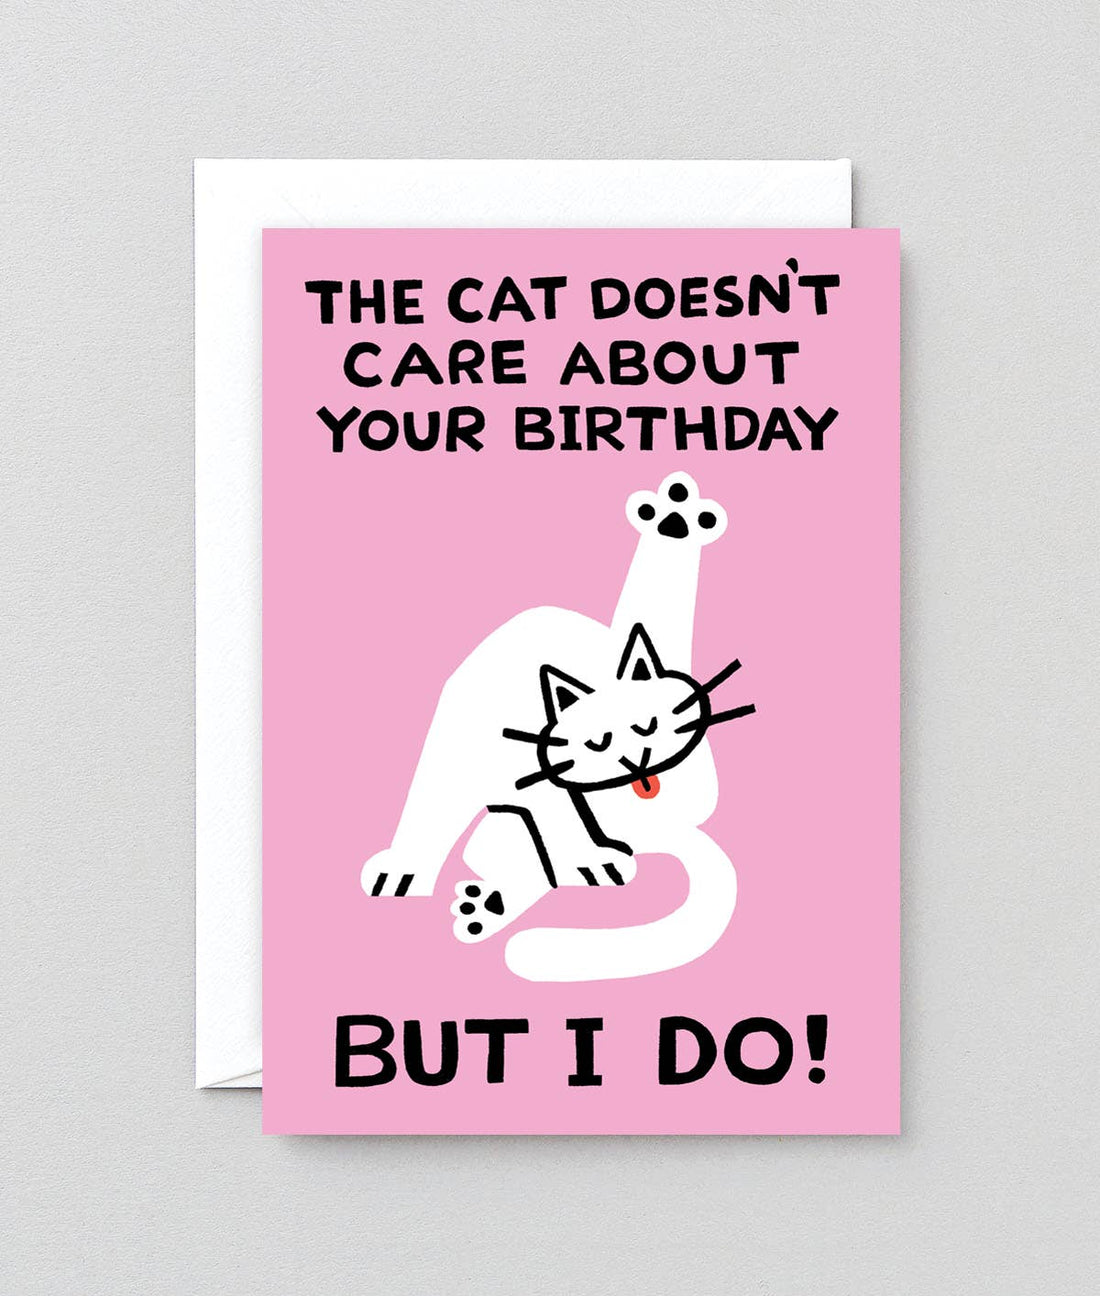 'The Cat Doesn’t Care’ Greetings Card